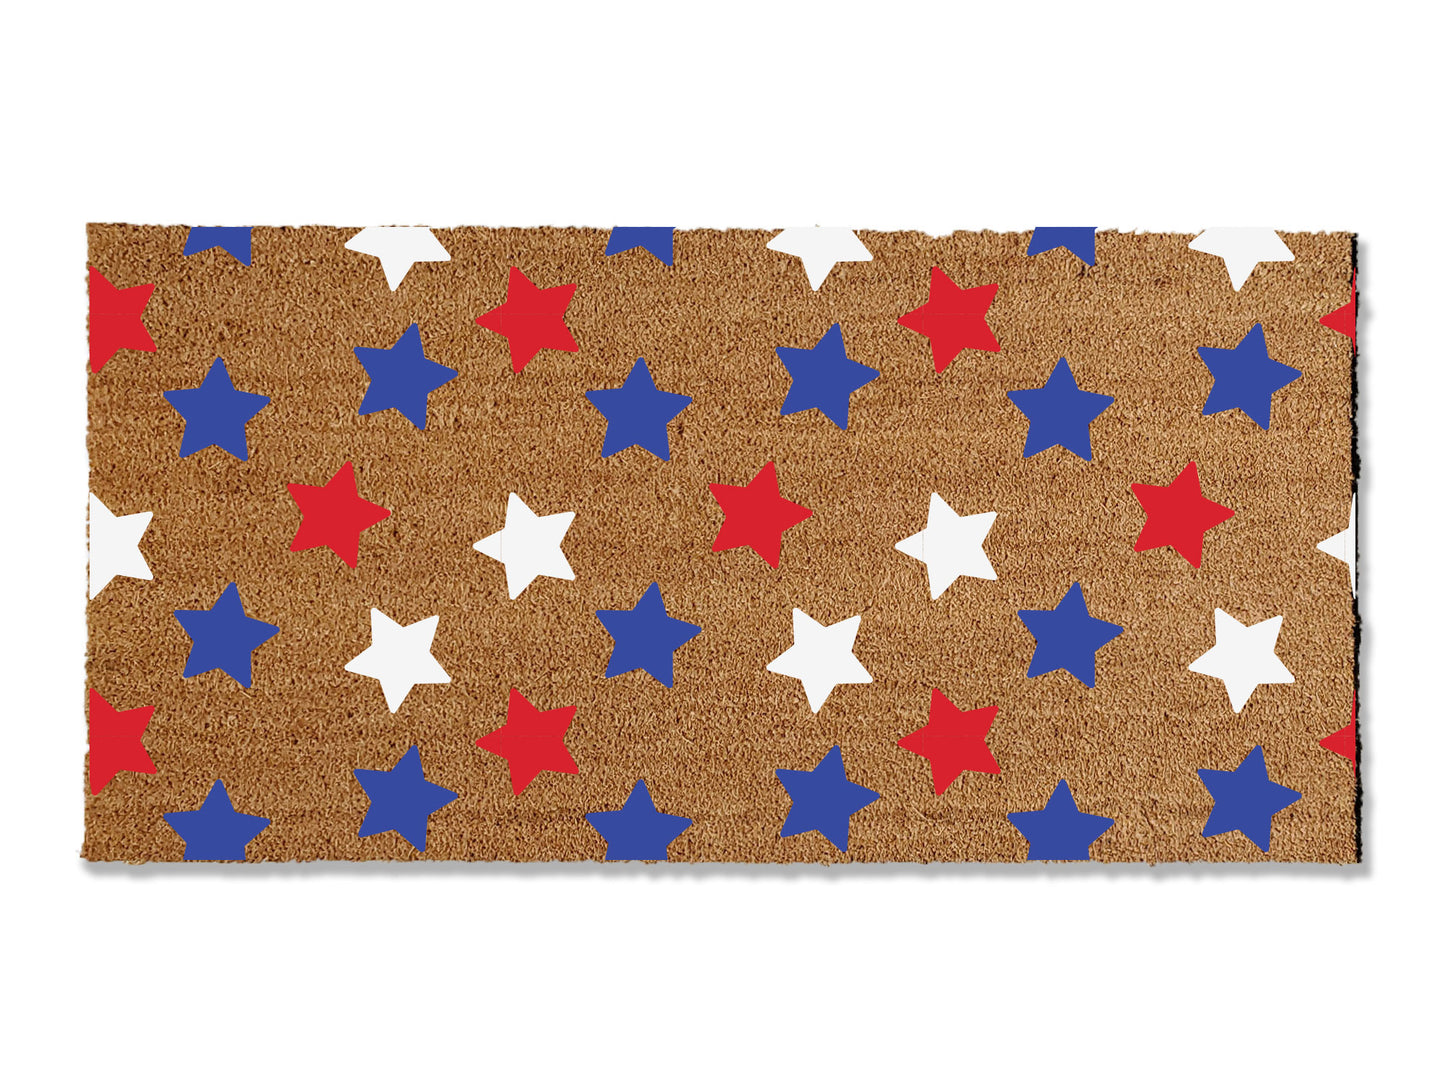 Infuse a patriotic spirit into your home with our coir doormat featuring a red, white, and blue star pattern. Ideal for a patriotic home, Memorial Day, or the 4th of July, this perfect addition to your entryway is sure to bring a smile to guests' faces. Welcome with style and national pride using this vibrant and festive coir doormat.